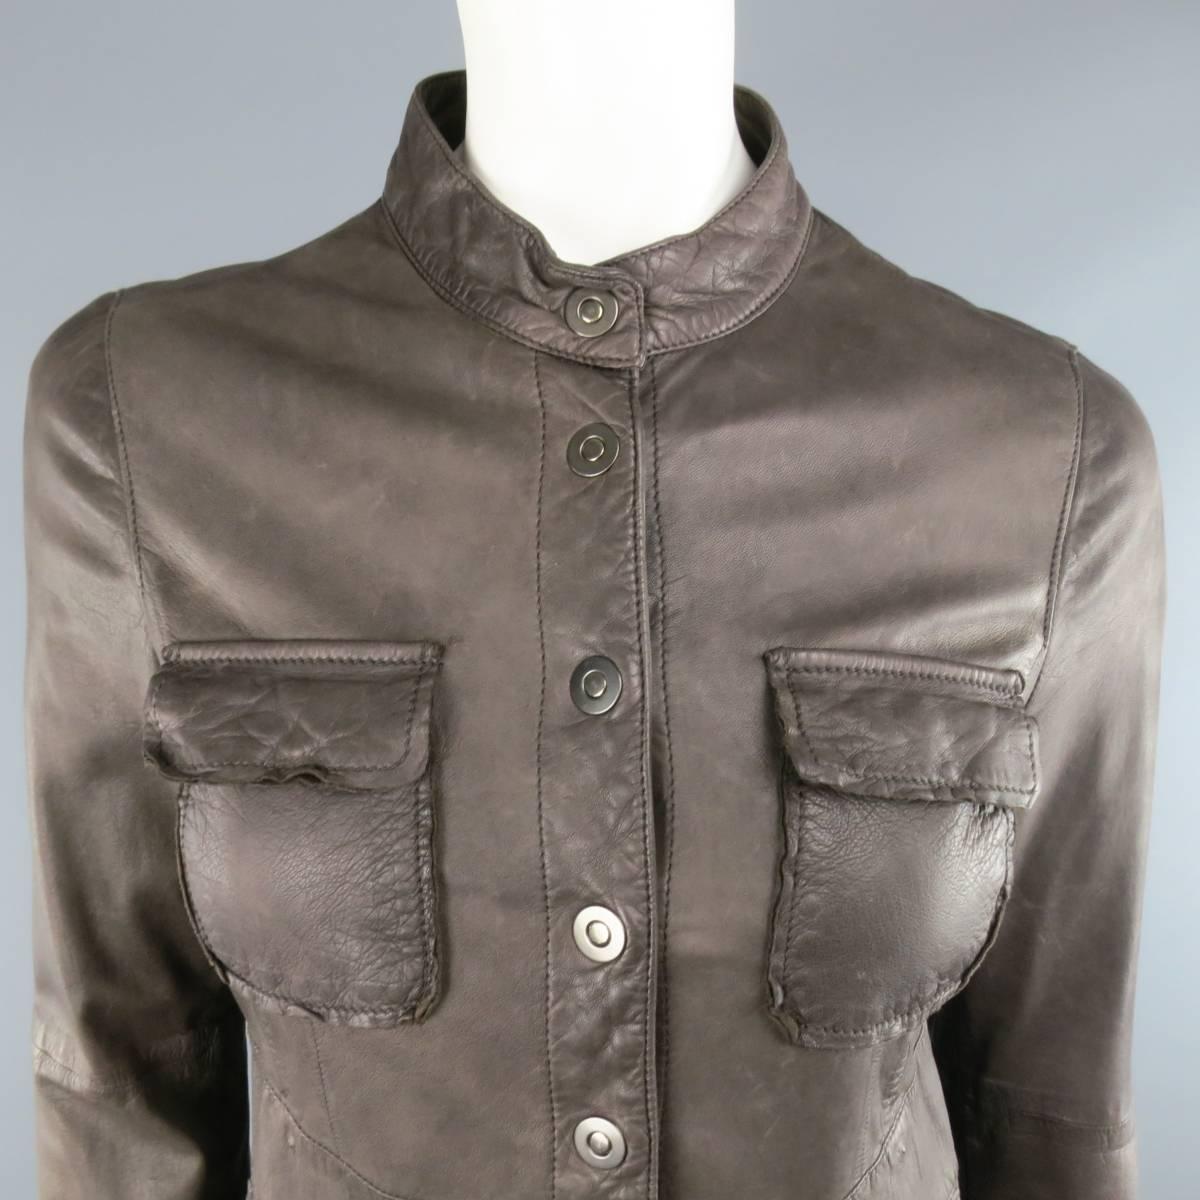 EMPORIO ARMANI fitted military jacket in a soft distressed taupe leather featuring a nehru band collar, snap closure, patch pockets, and ruffled back. Belt removed, very small holes along waist. As-Is.
 
Fair Pre-Owned Condition.
Marked: 6
